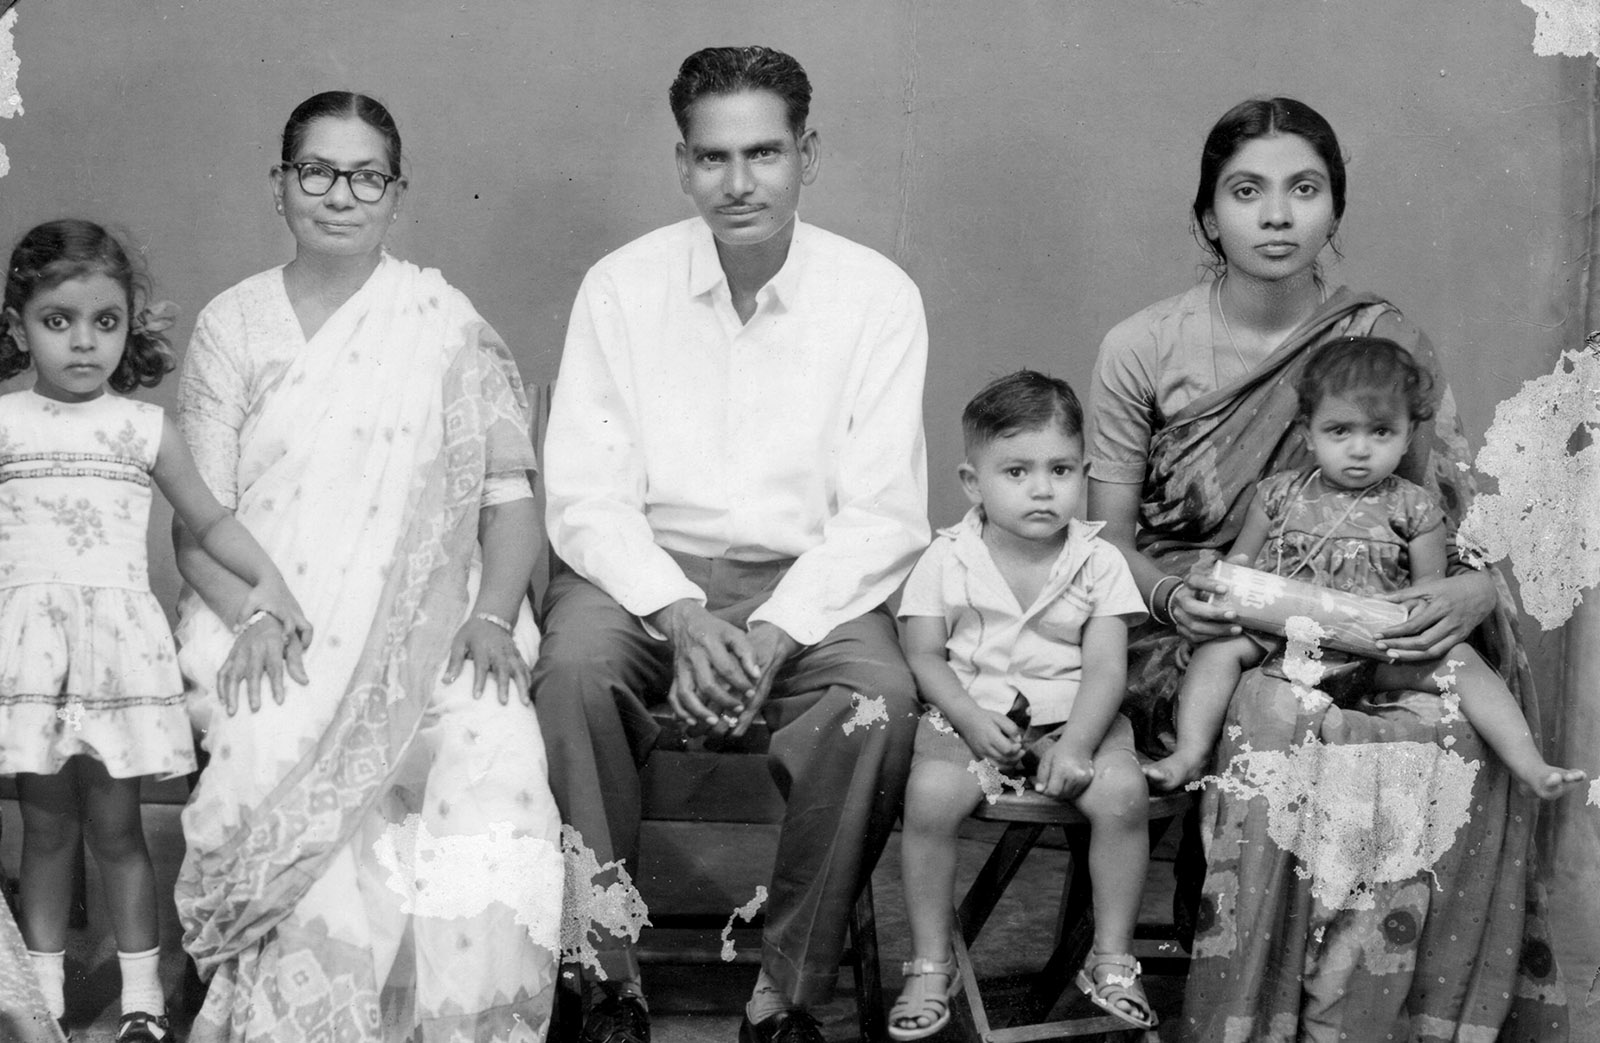 Sujatha Gidla, far left, with her family, Andhra Pradesh, India, 1966. Her mother, Manjula, is at right.